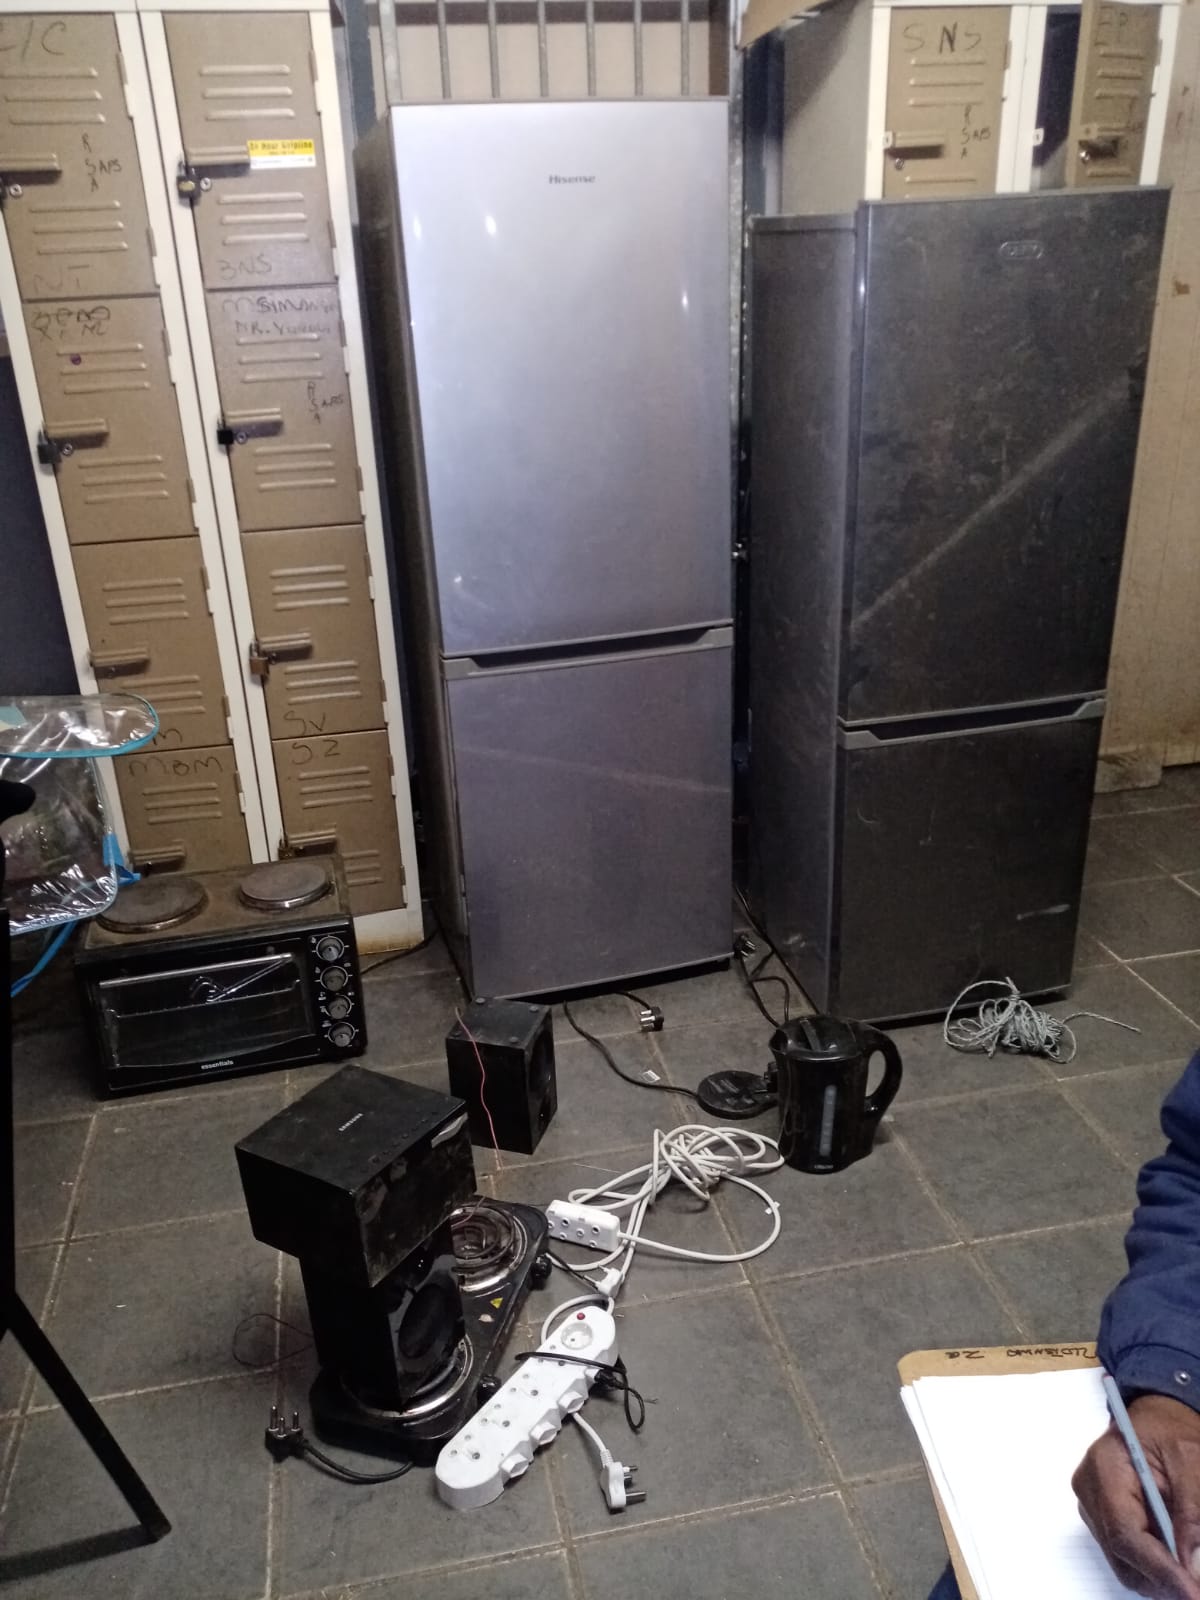 Three men caught with property stolen at a school cottage in Durban